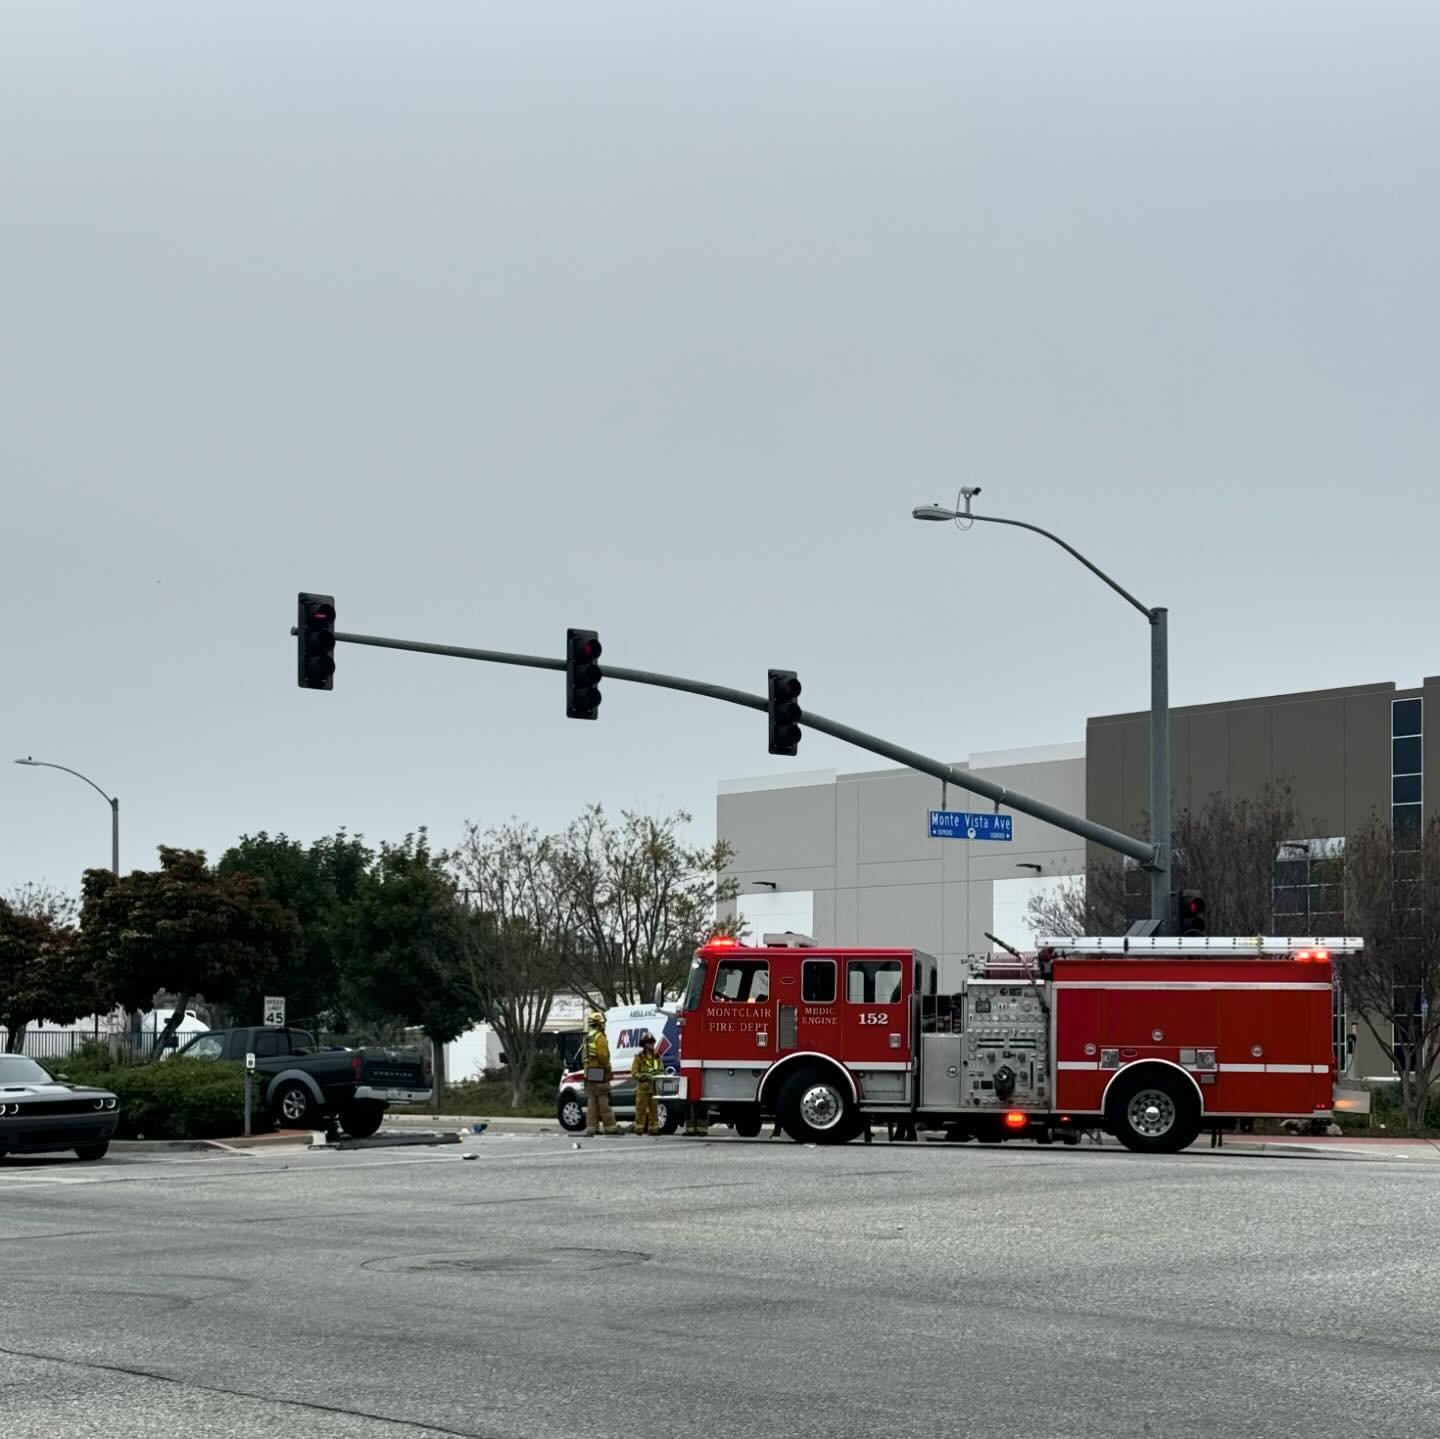 ME 152 responding to a traffic collision on Monte Vista and Mission this morning 🚒

#montclair #mymontclair #montclairfire #montclairfiredepartment #ME152 #TC #trafficcollision #trafficalert #trafficaccident #firstresponders #firefighter #california